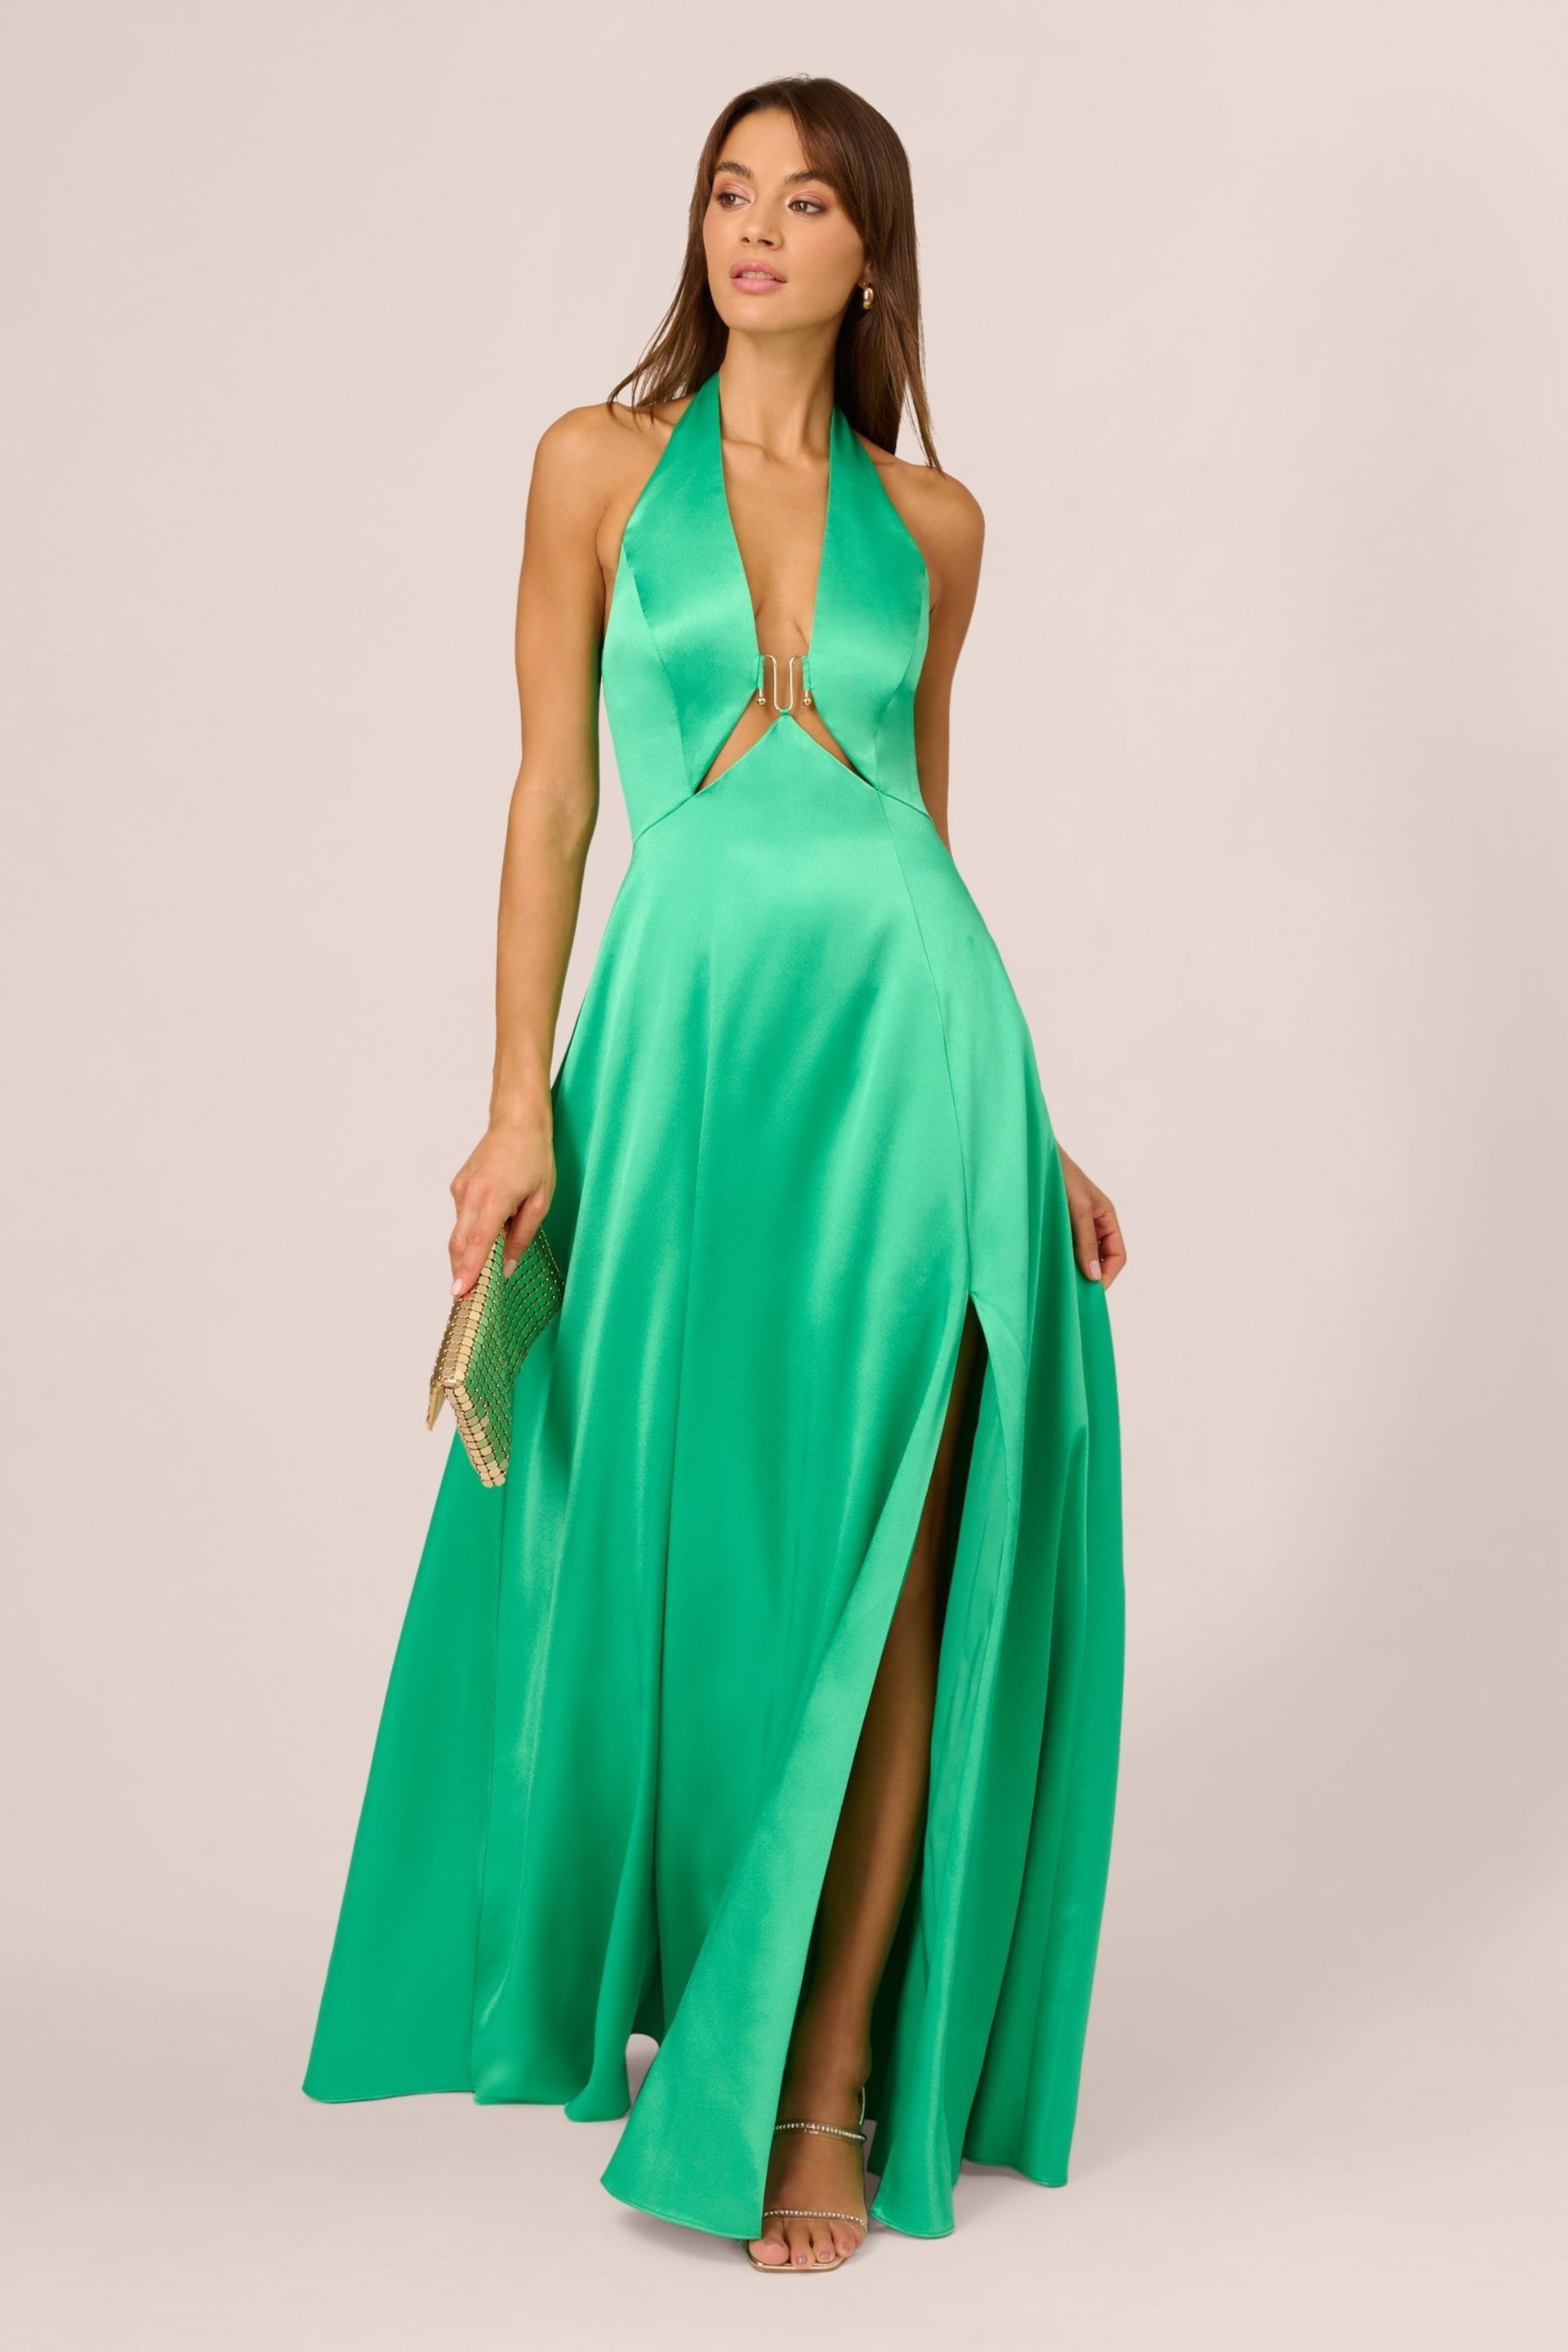 Adrianna Papell Green Liquid Satin A-Line Gown - Image 3 of 7